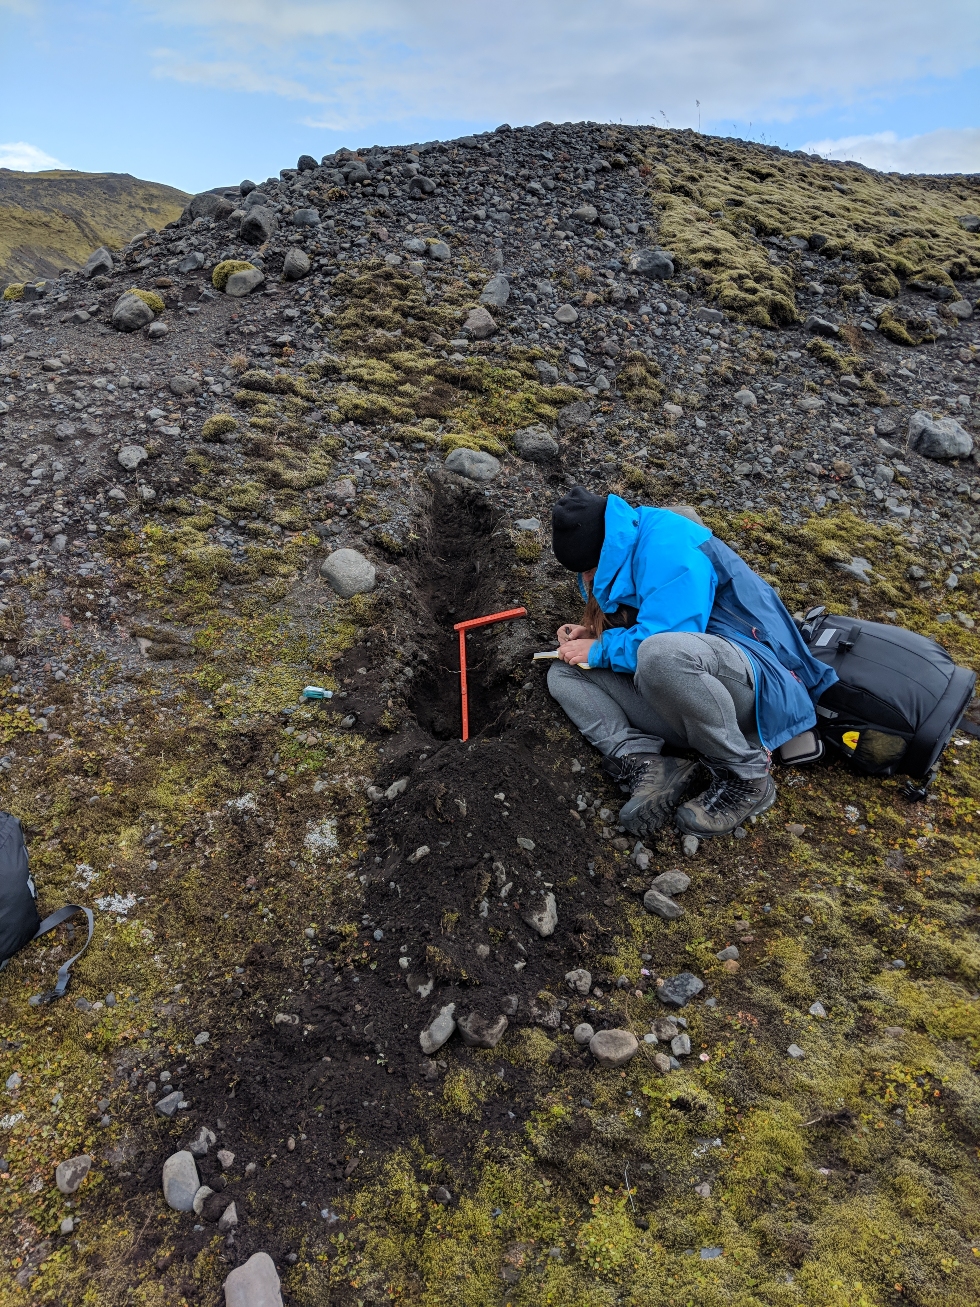 Collection of sedimentological data is often done by digging pits in a variety of landforms where we then analyze the type, shape and size of the various sediments to try and understand how they were deposited. Here you can see me recording the sedimentological characteristics of a moraine. Note: using a scale (orange ruler) is integral to field work!